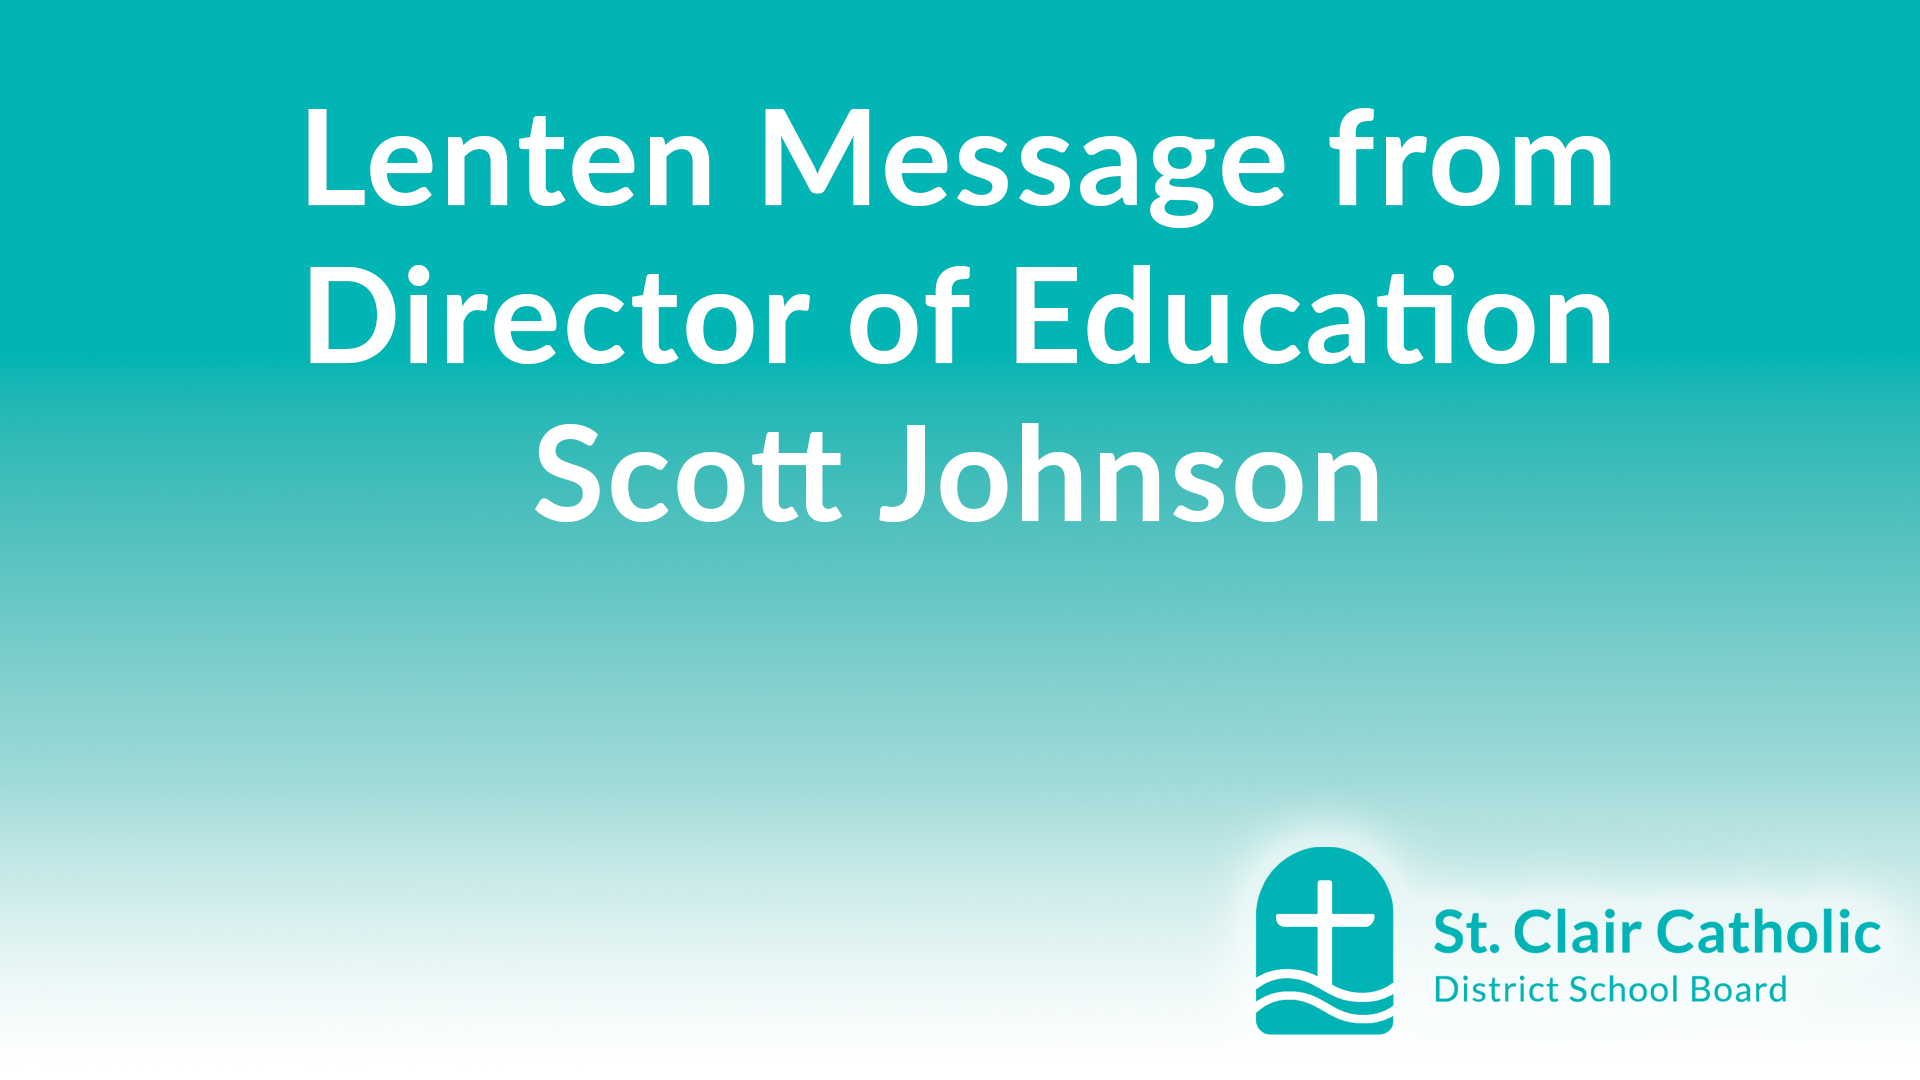 Lenten Message from the Director of Education